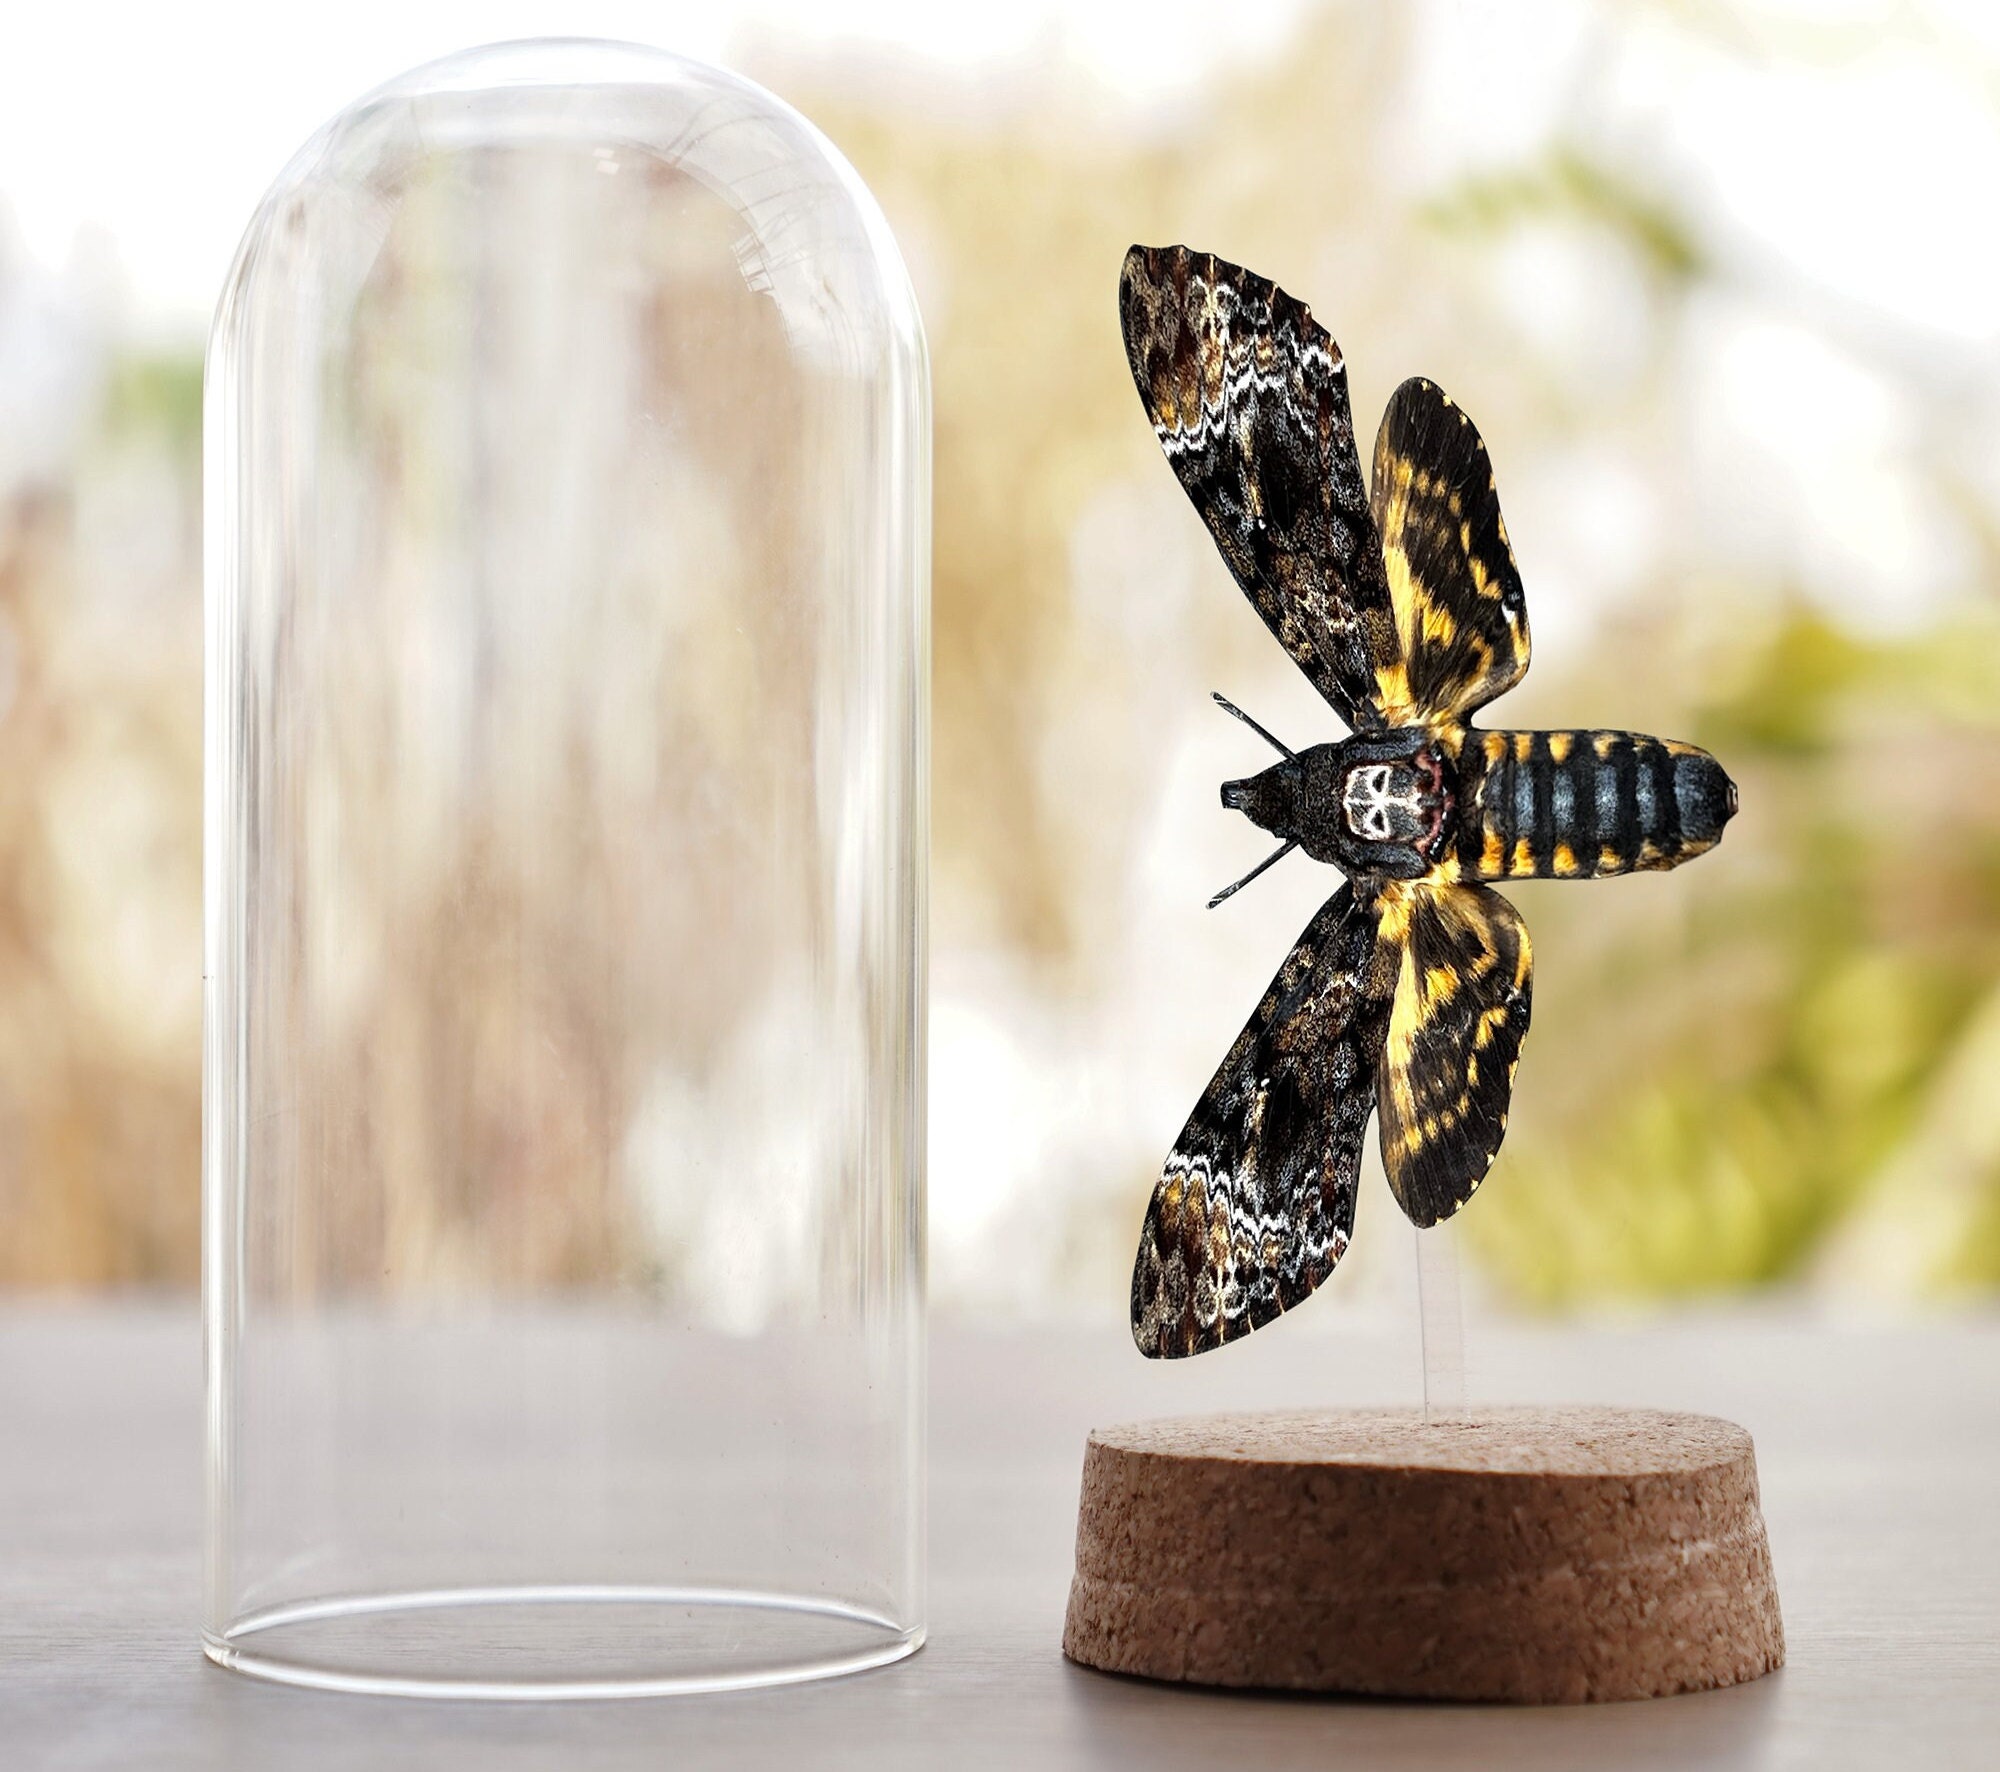 Intriguing deaths head moth, spread and mounted in a glass dome